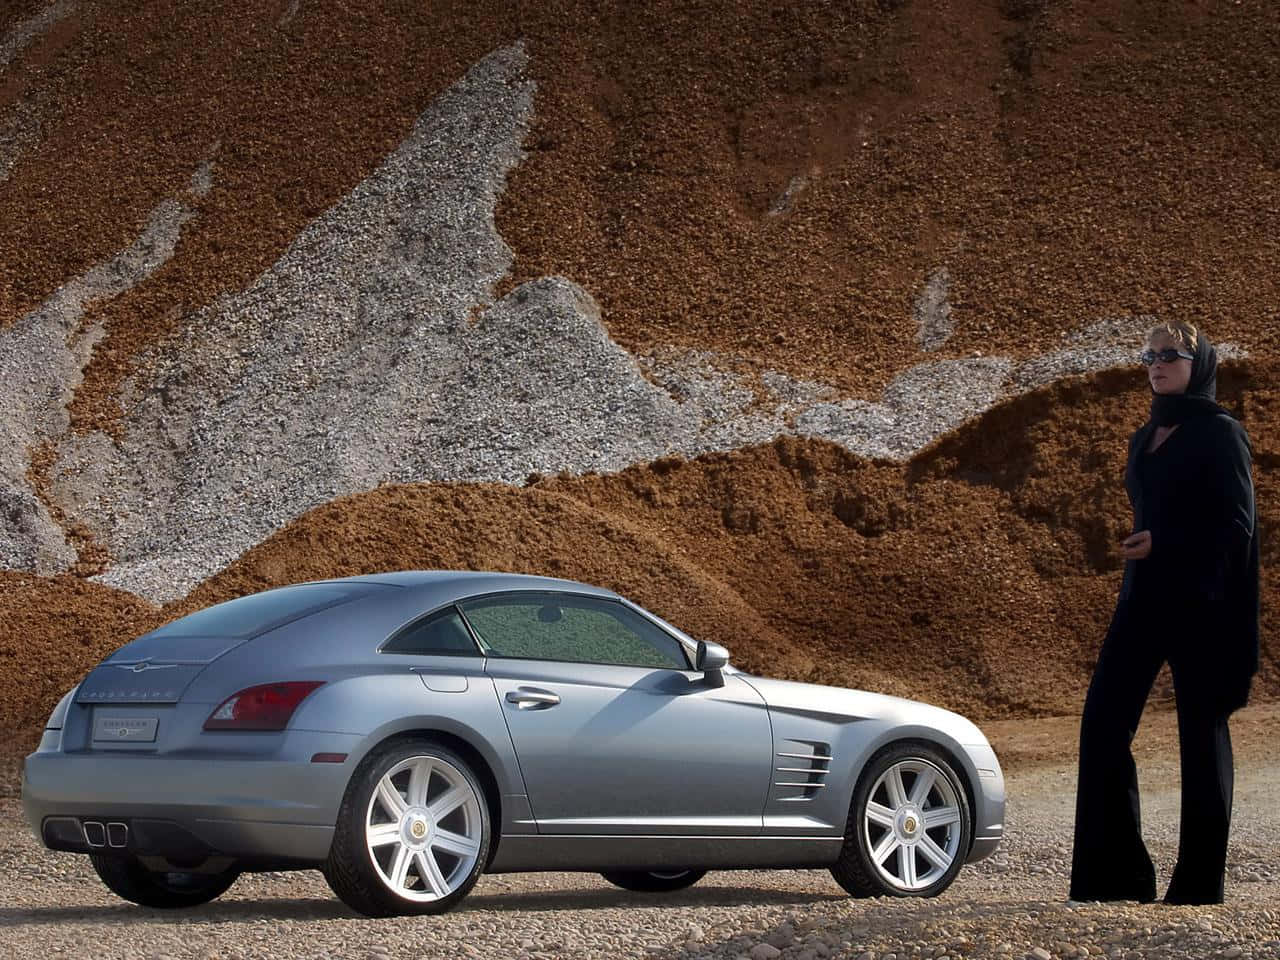 Stunning Chrysler Crossfire in a picturesque city background Wallpaper